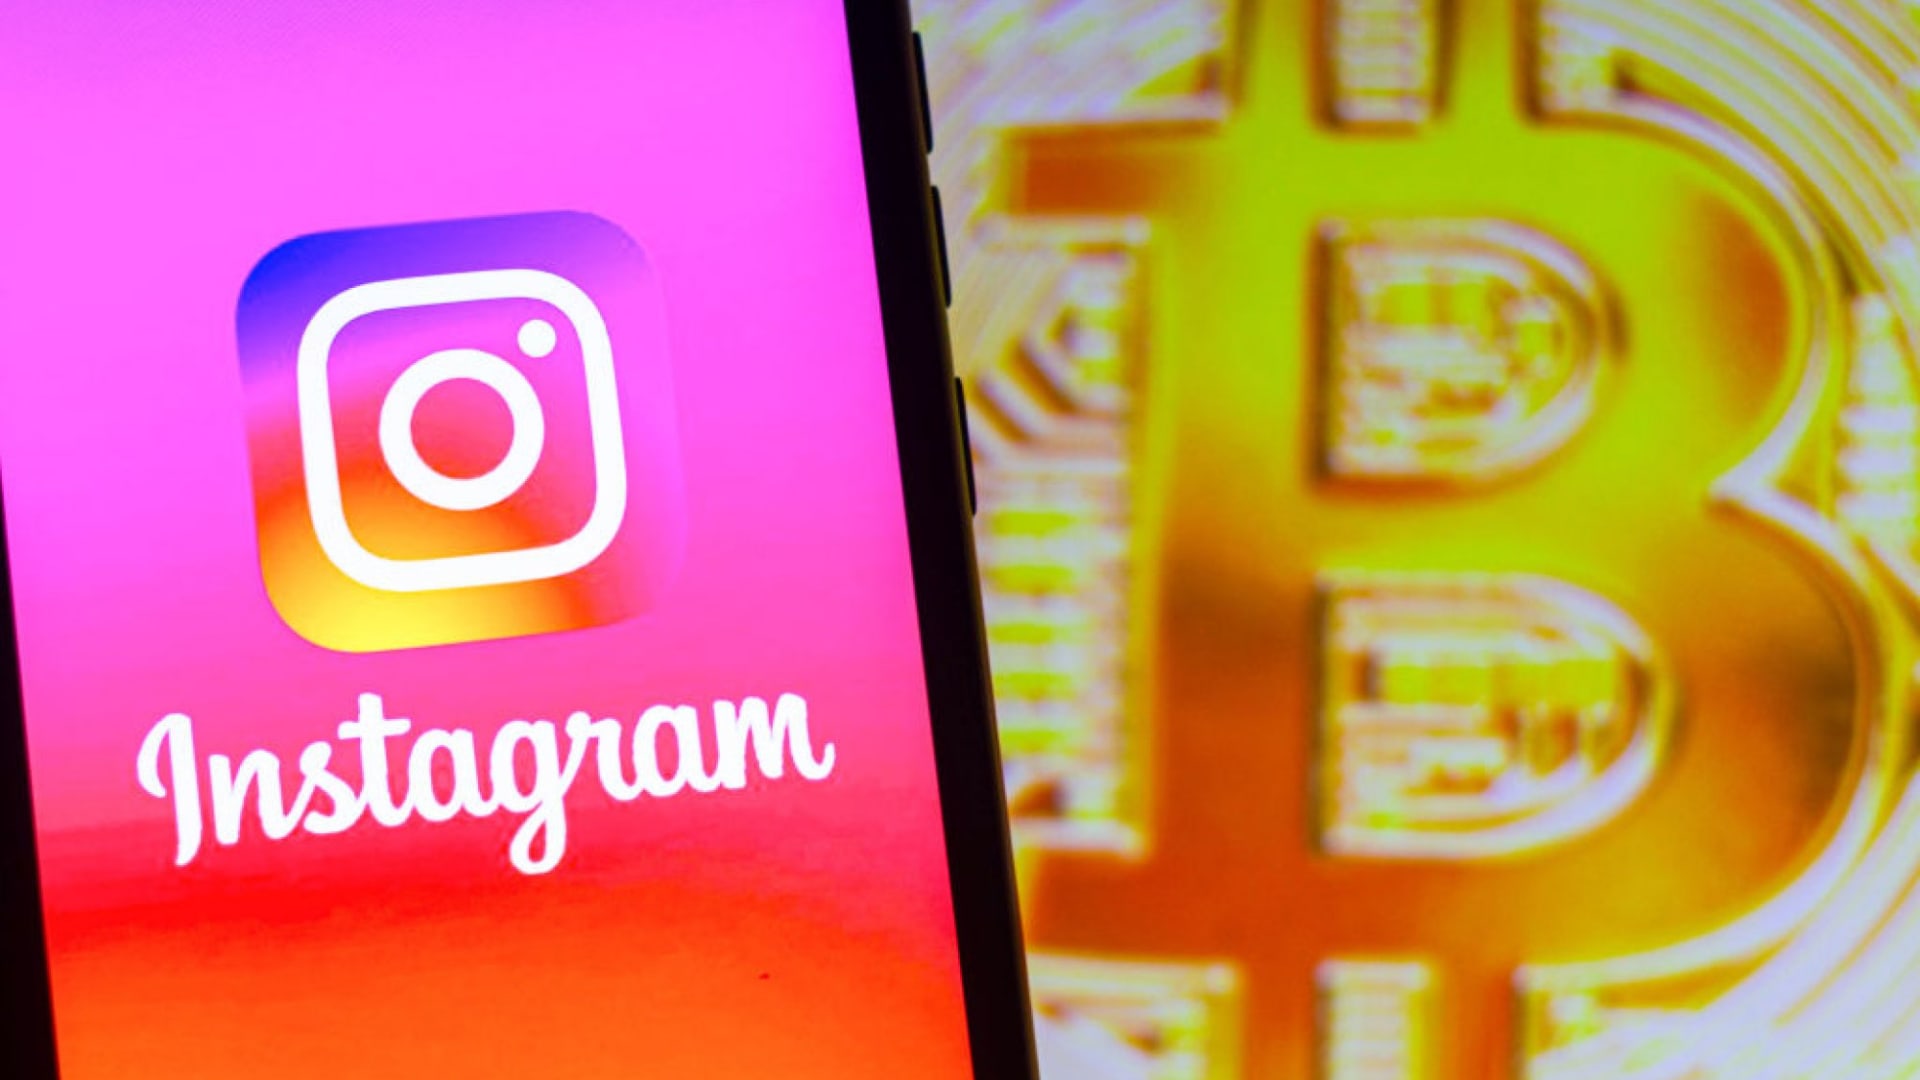 Instagram Is Exploring a New Feature That Could Make Some Users a Fortune